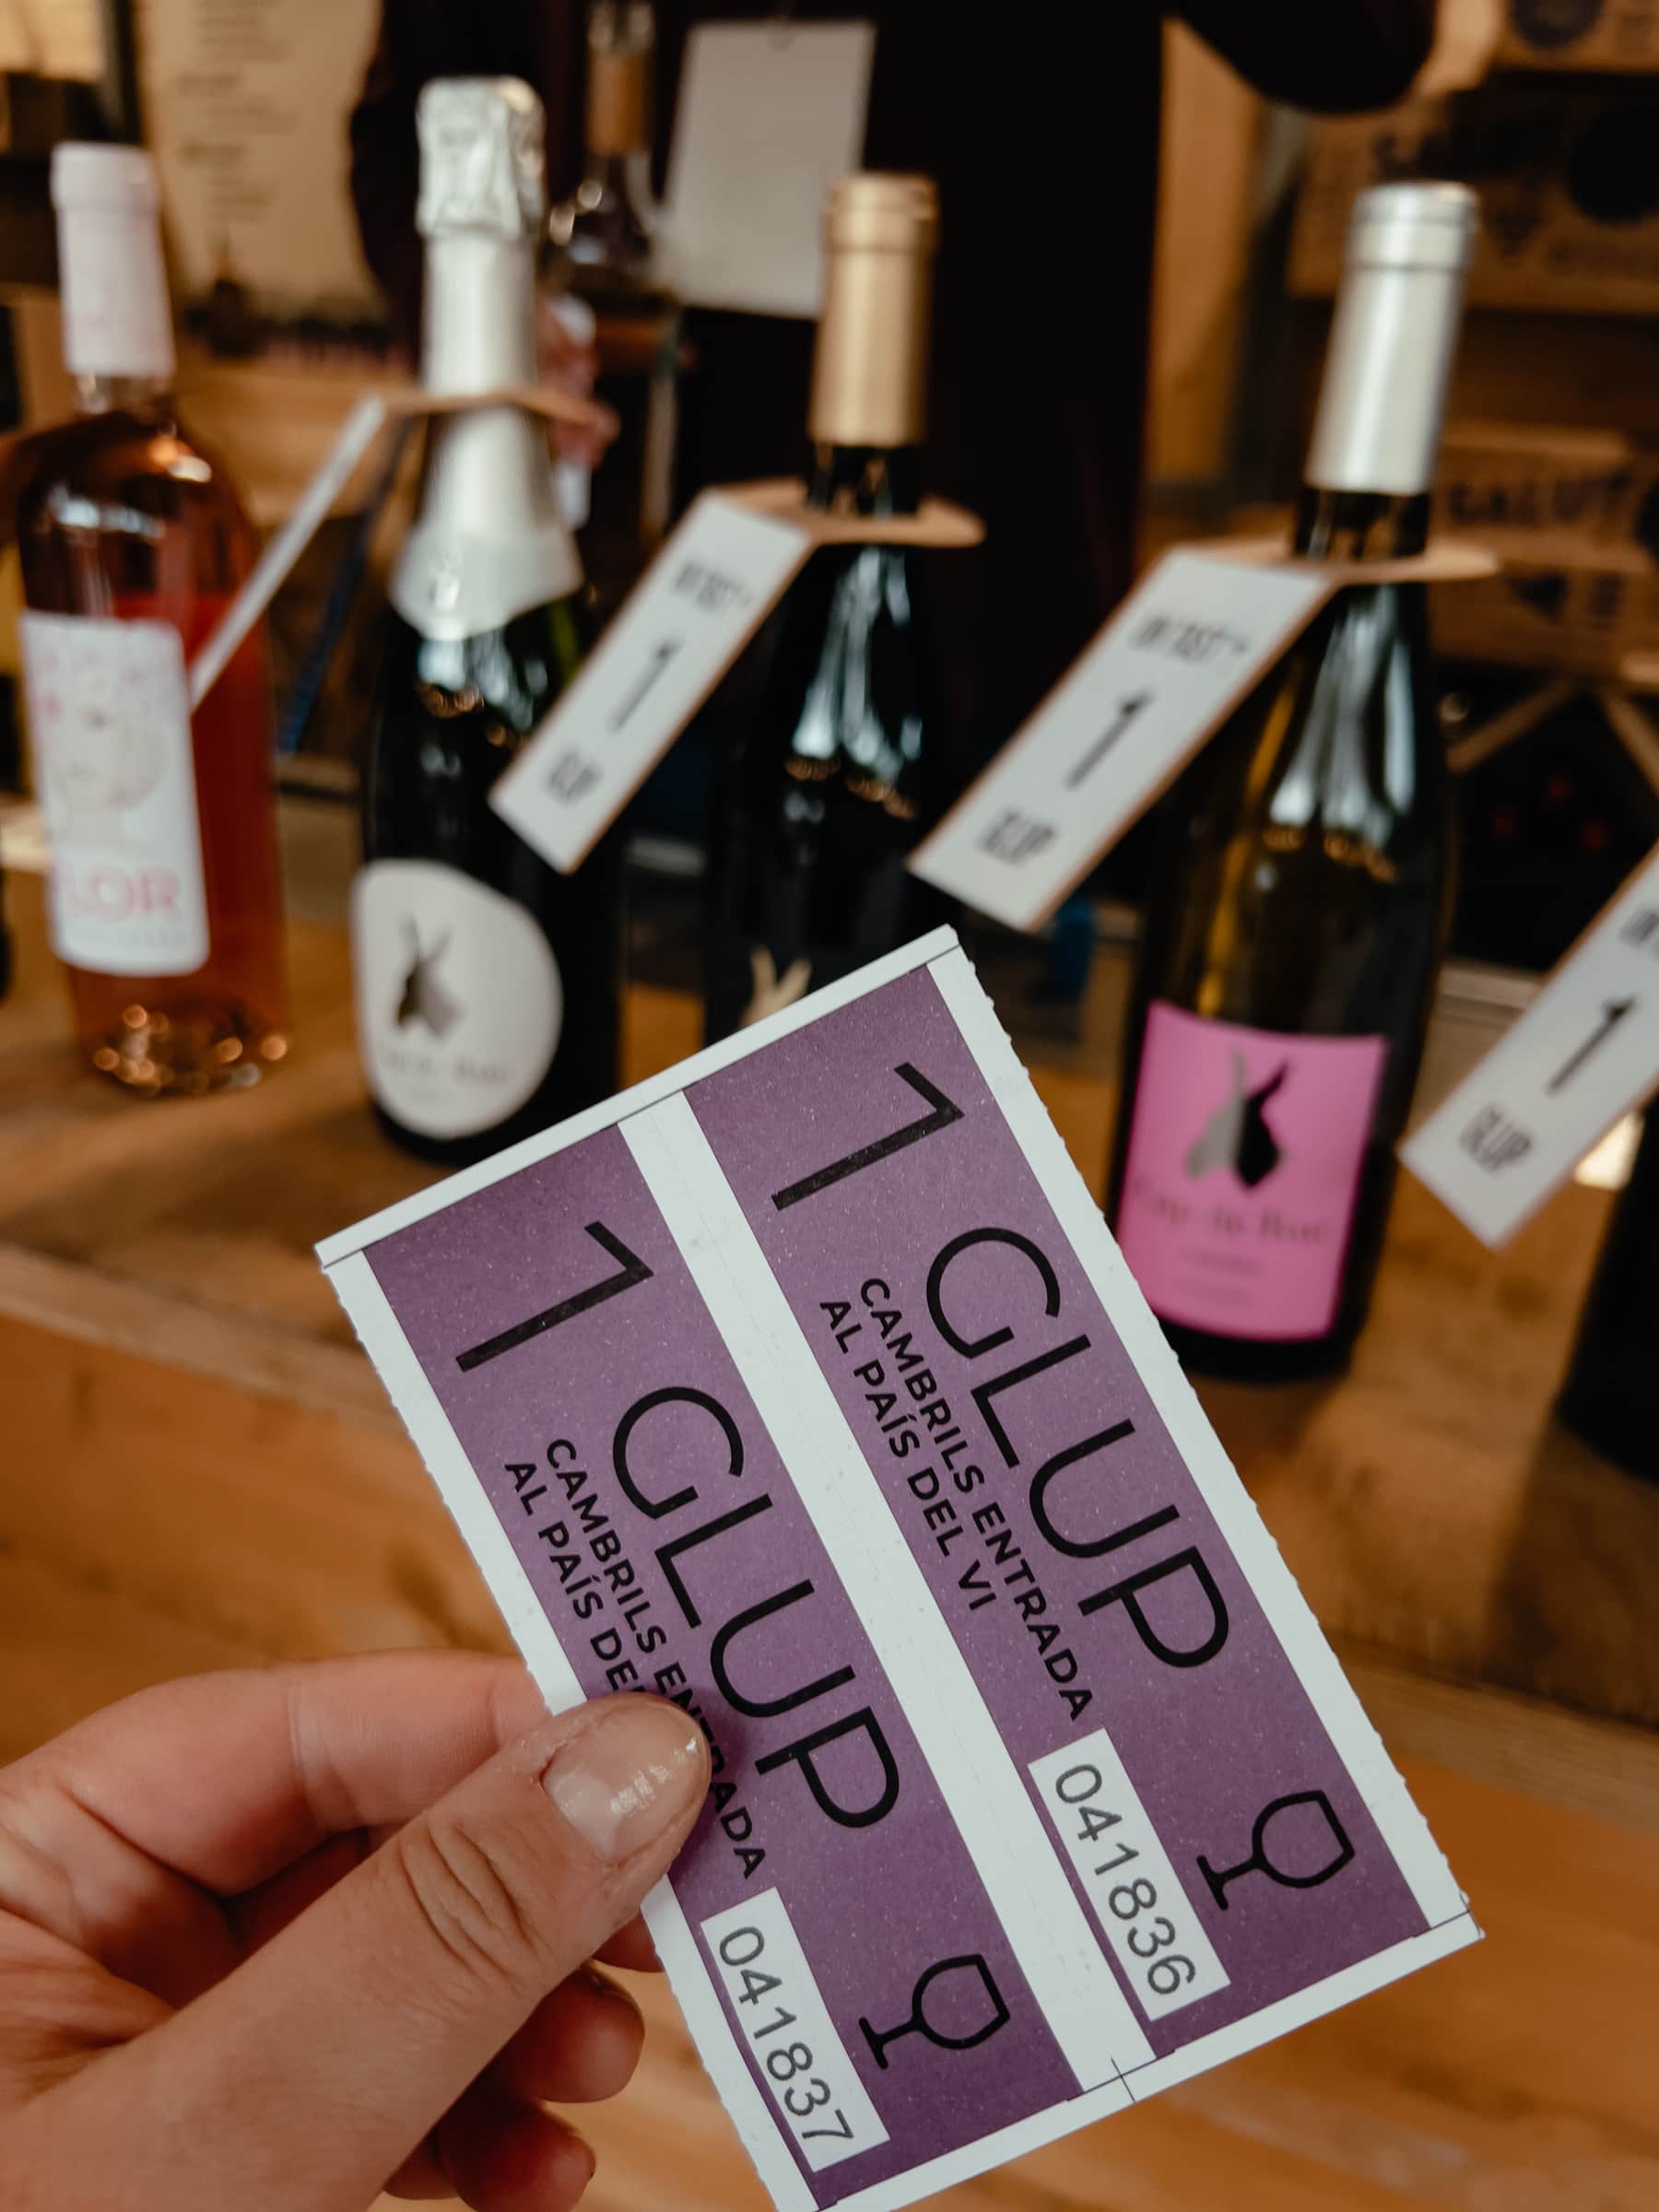 Drink vouchers at the wine festival in Cambrils labeled with Gulp